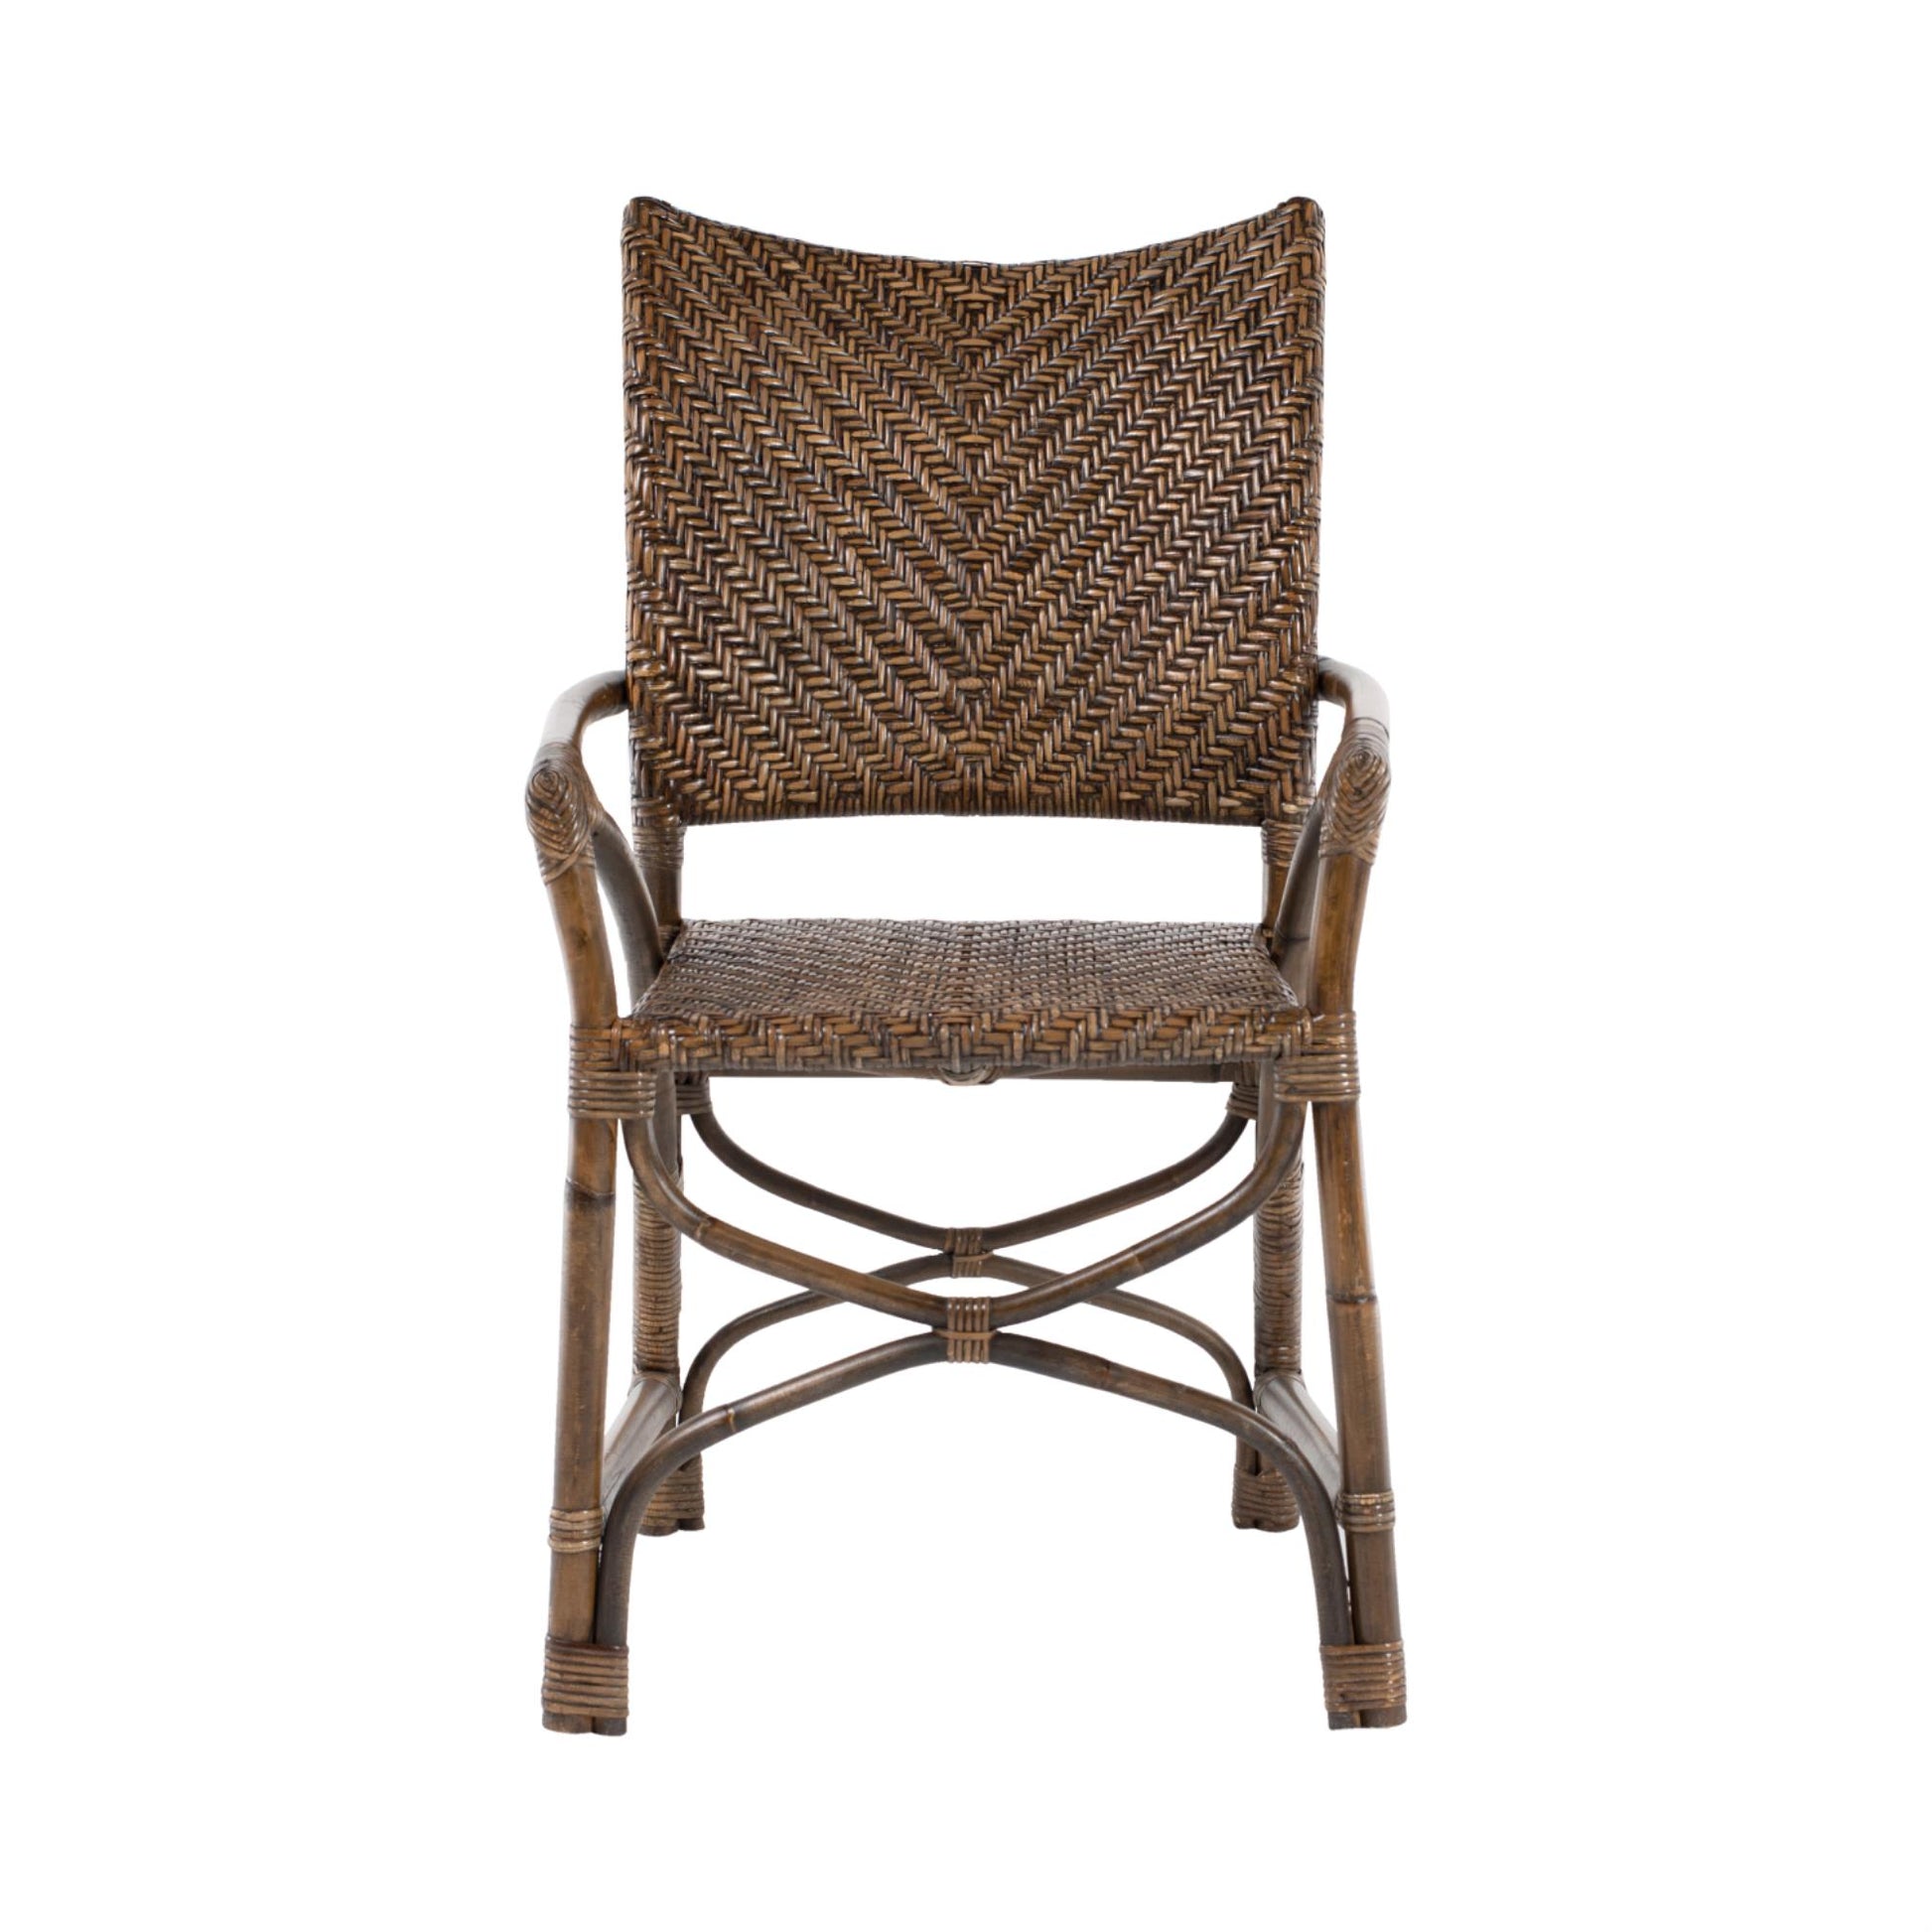 Wickerworks collection by Nova Solo.  Countess Chair (Set of 2) CasaFenix